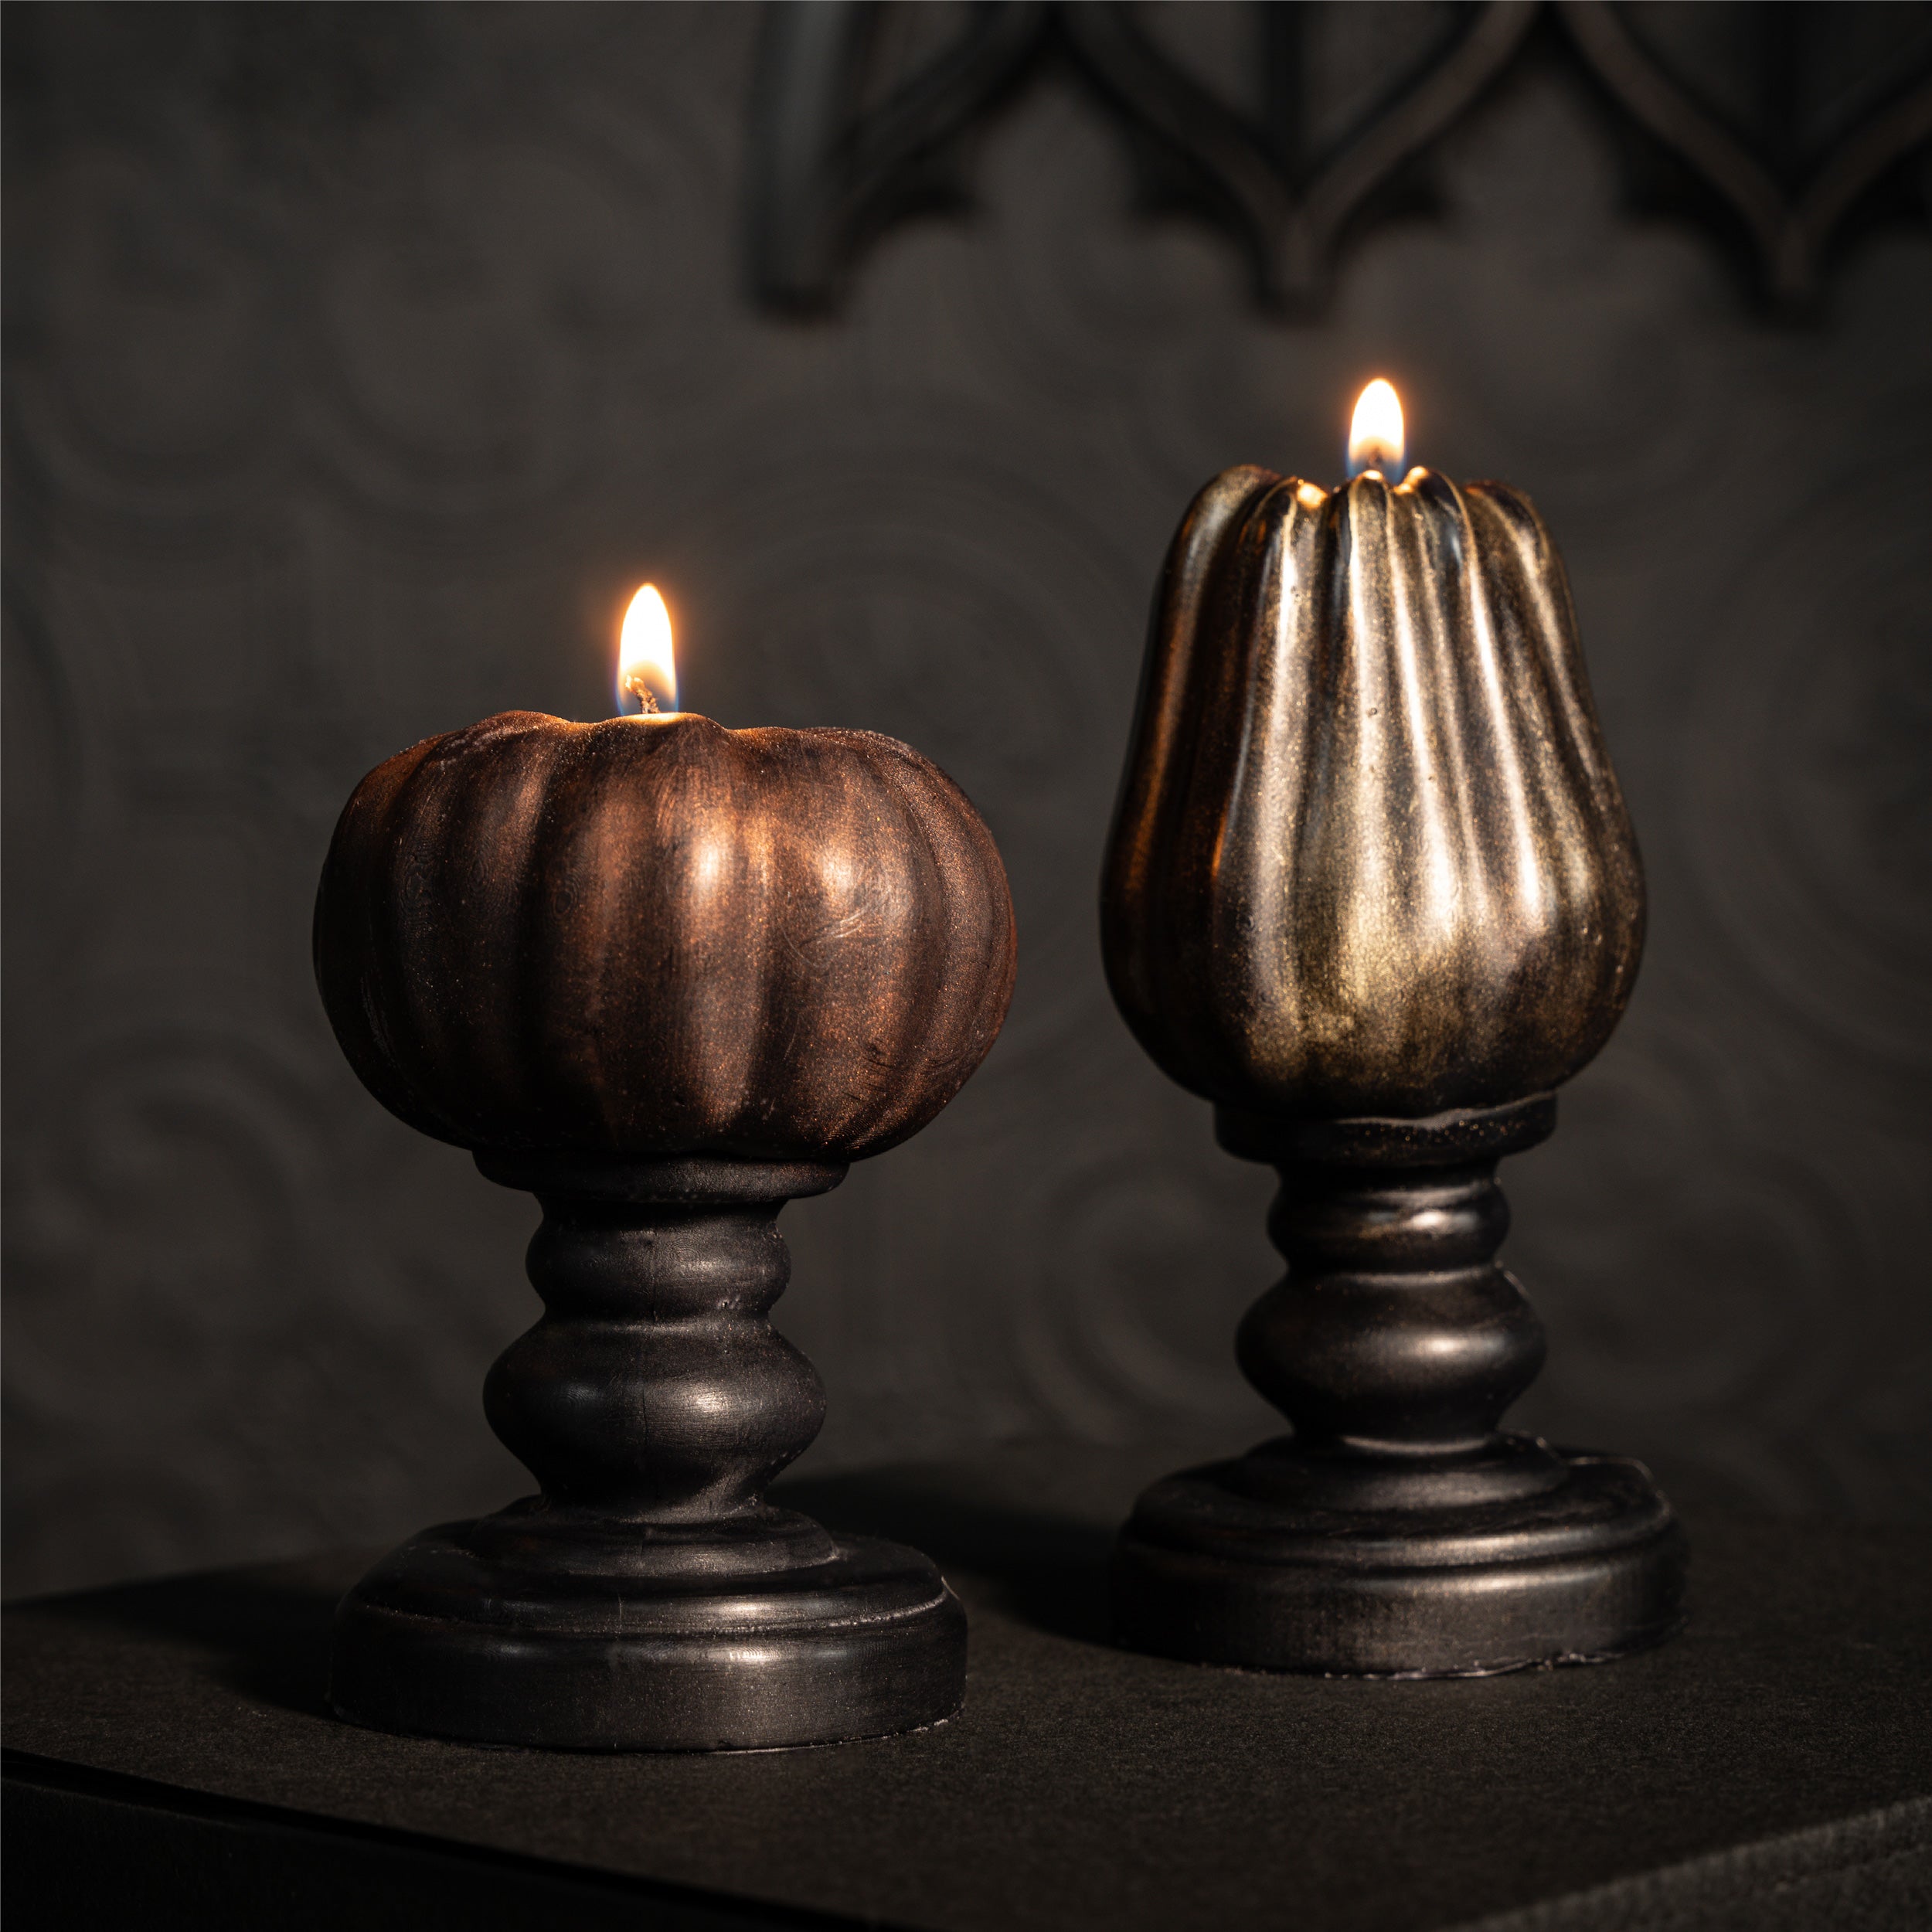 gold pumpkin candle by the blackened teeth gothic home decor